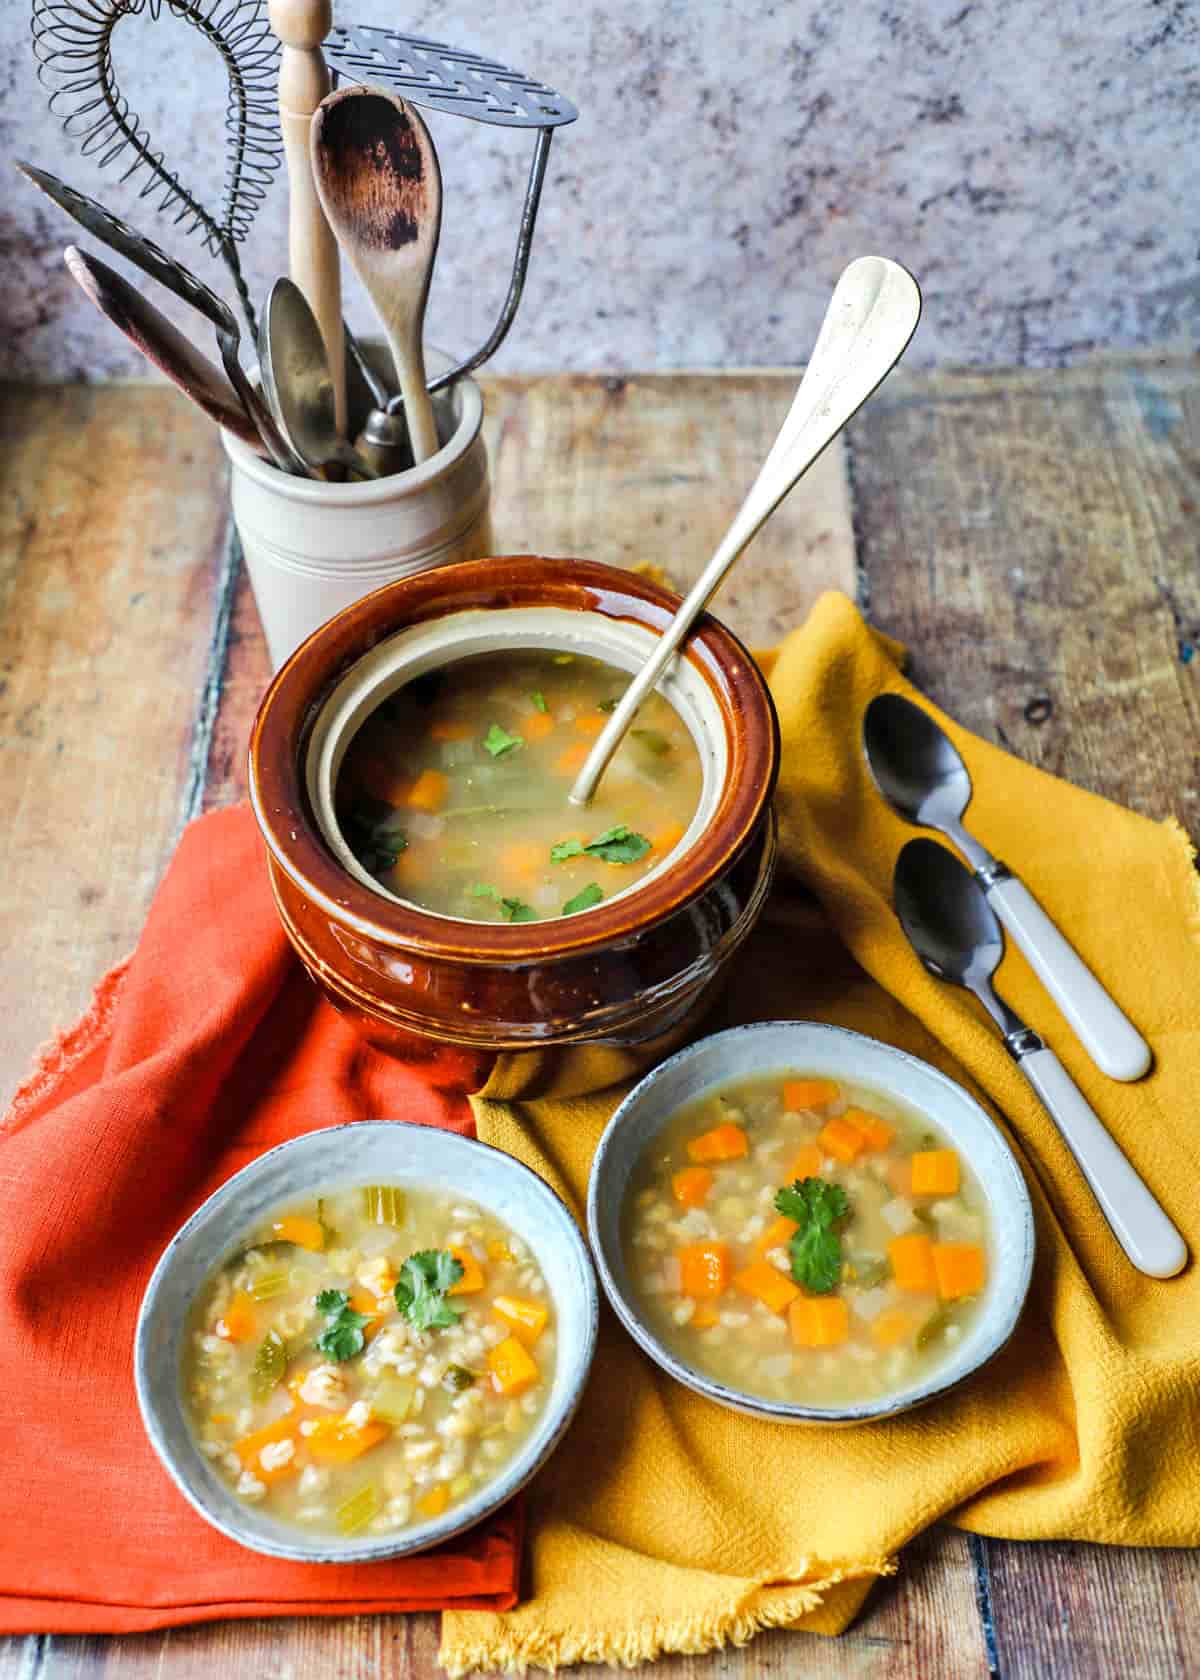 Scotch Broth with bowls, spoons, tureern and kitchen implements